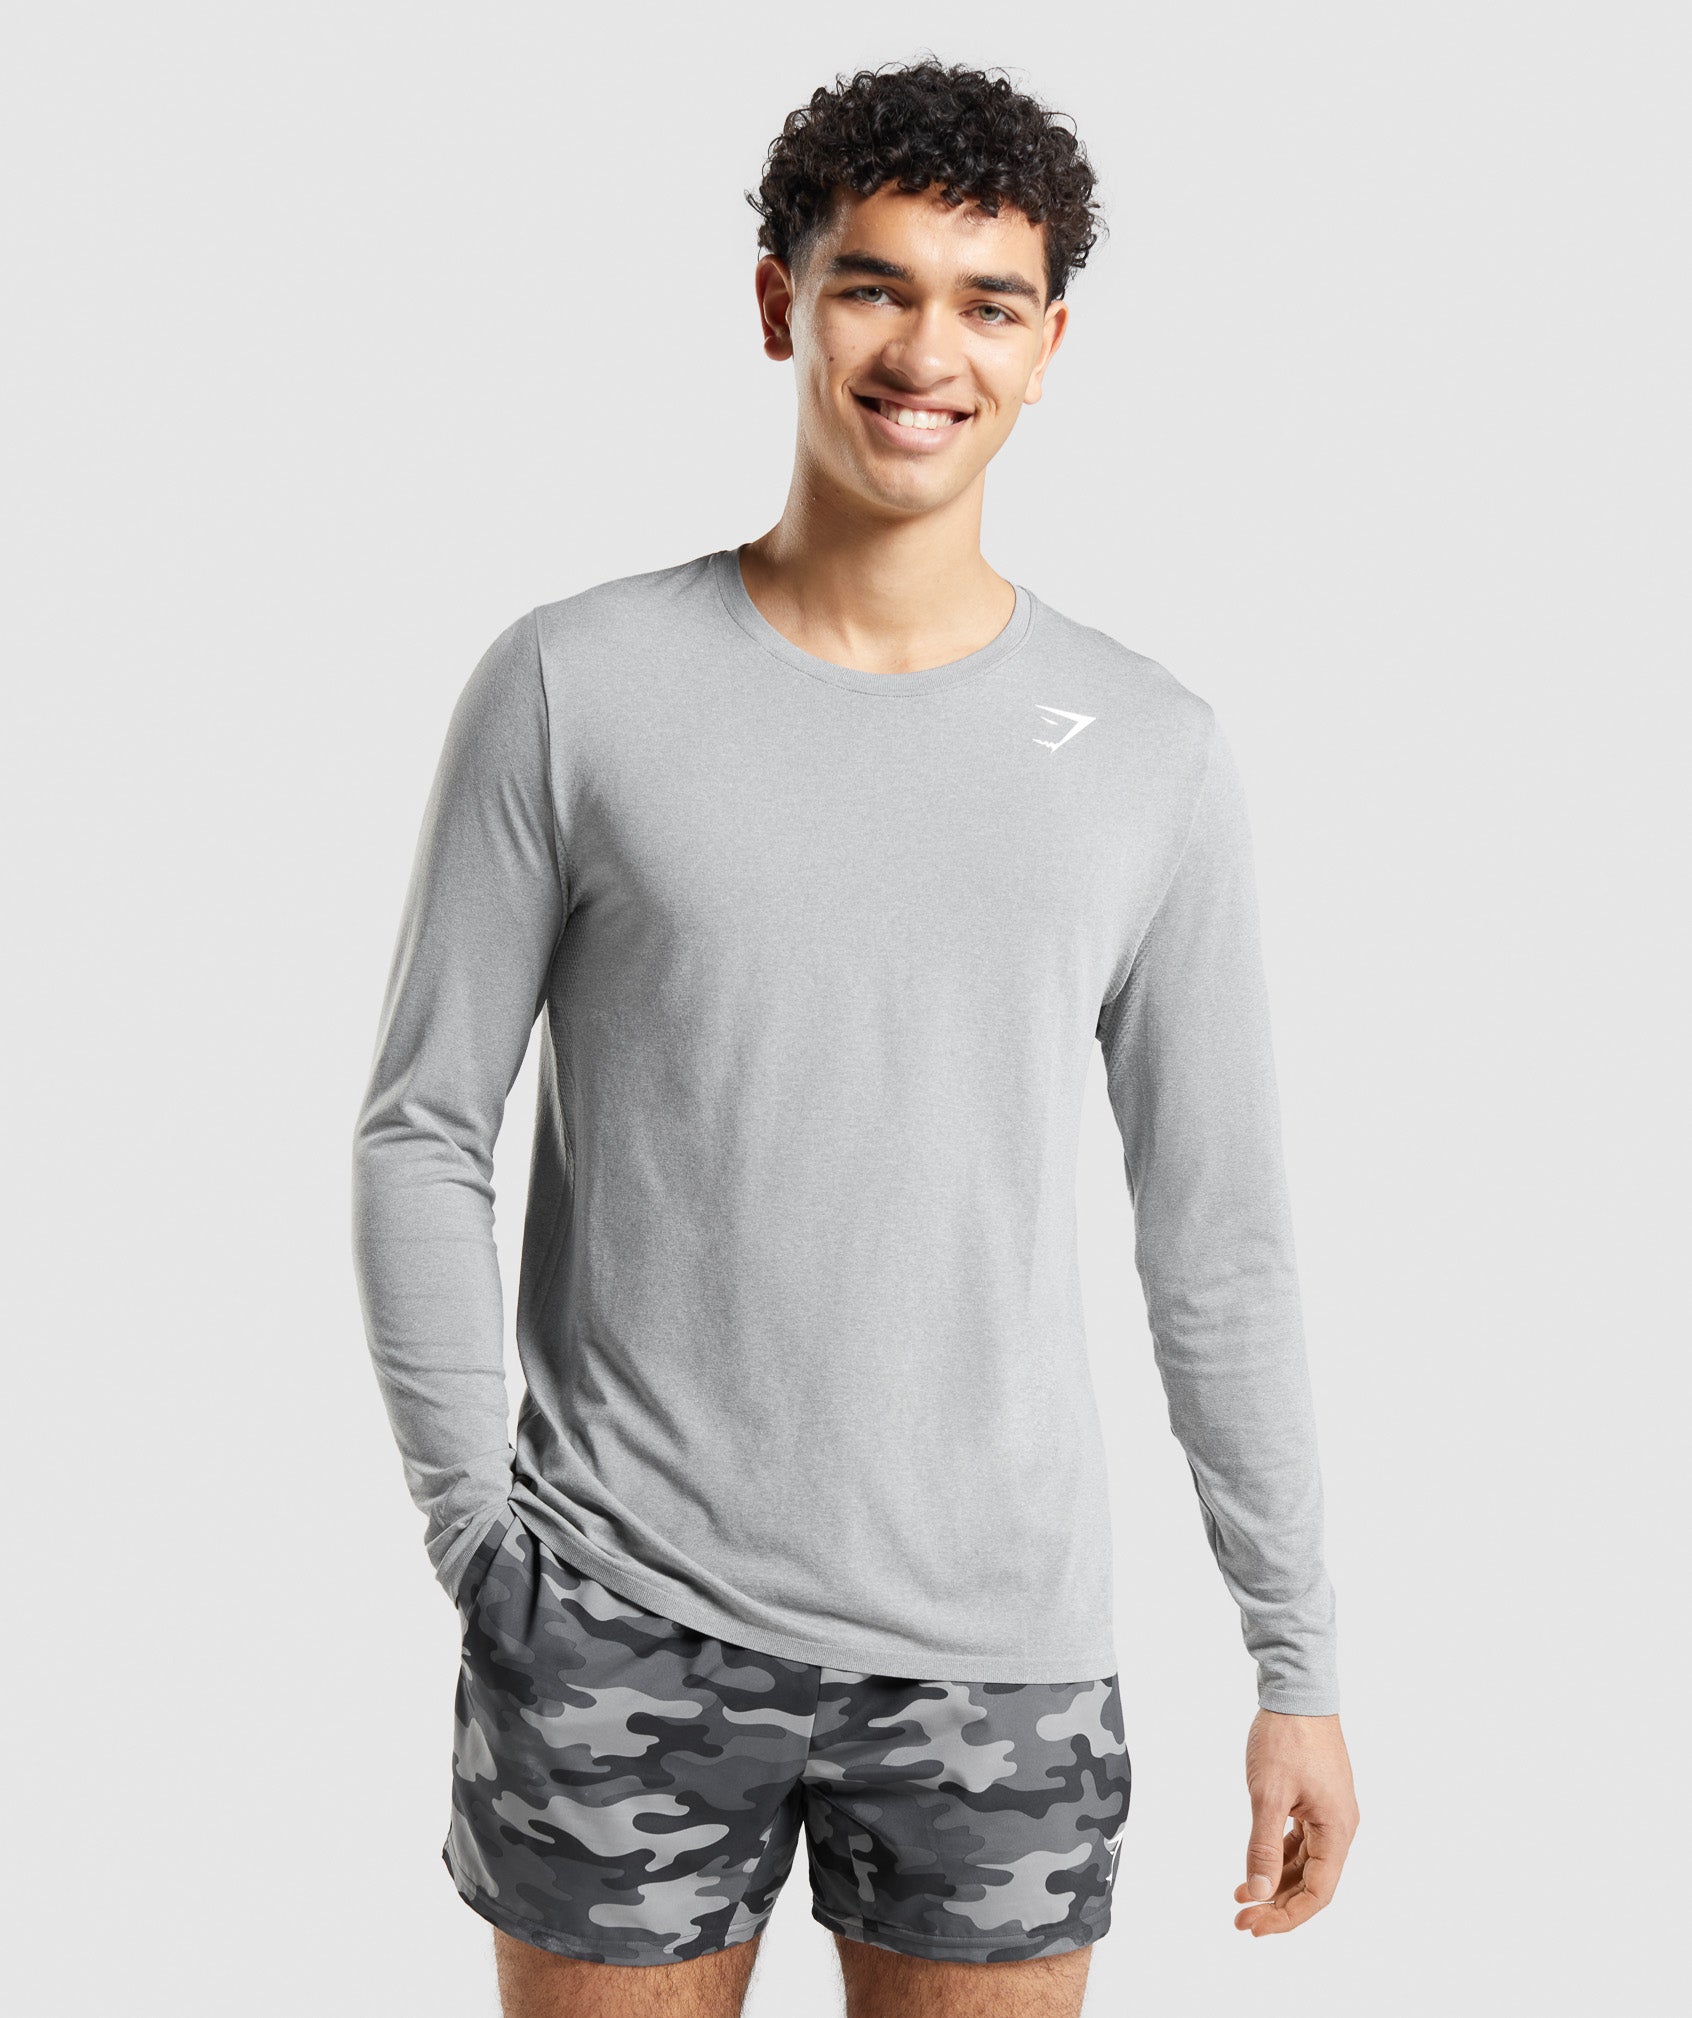 Arrival Seamless Long Sleeve T-Shirt in Grey - view 1